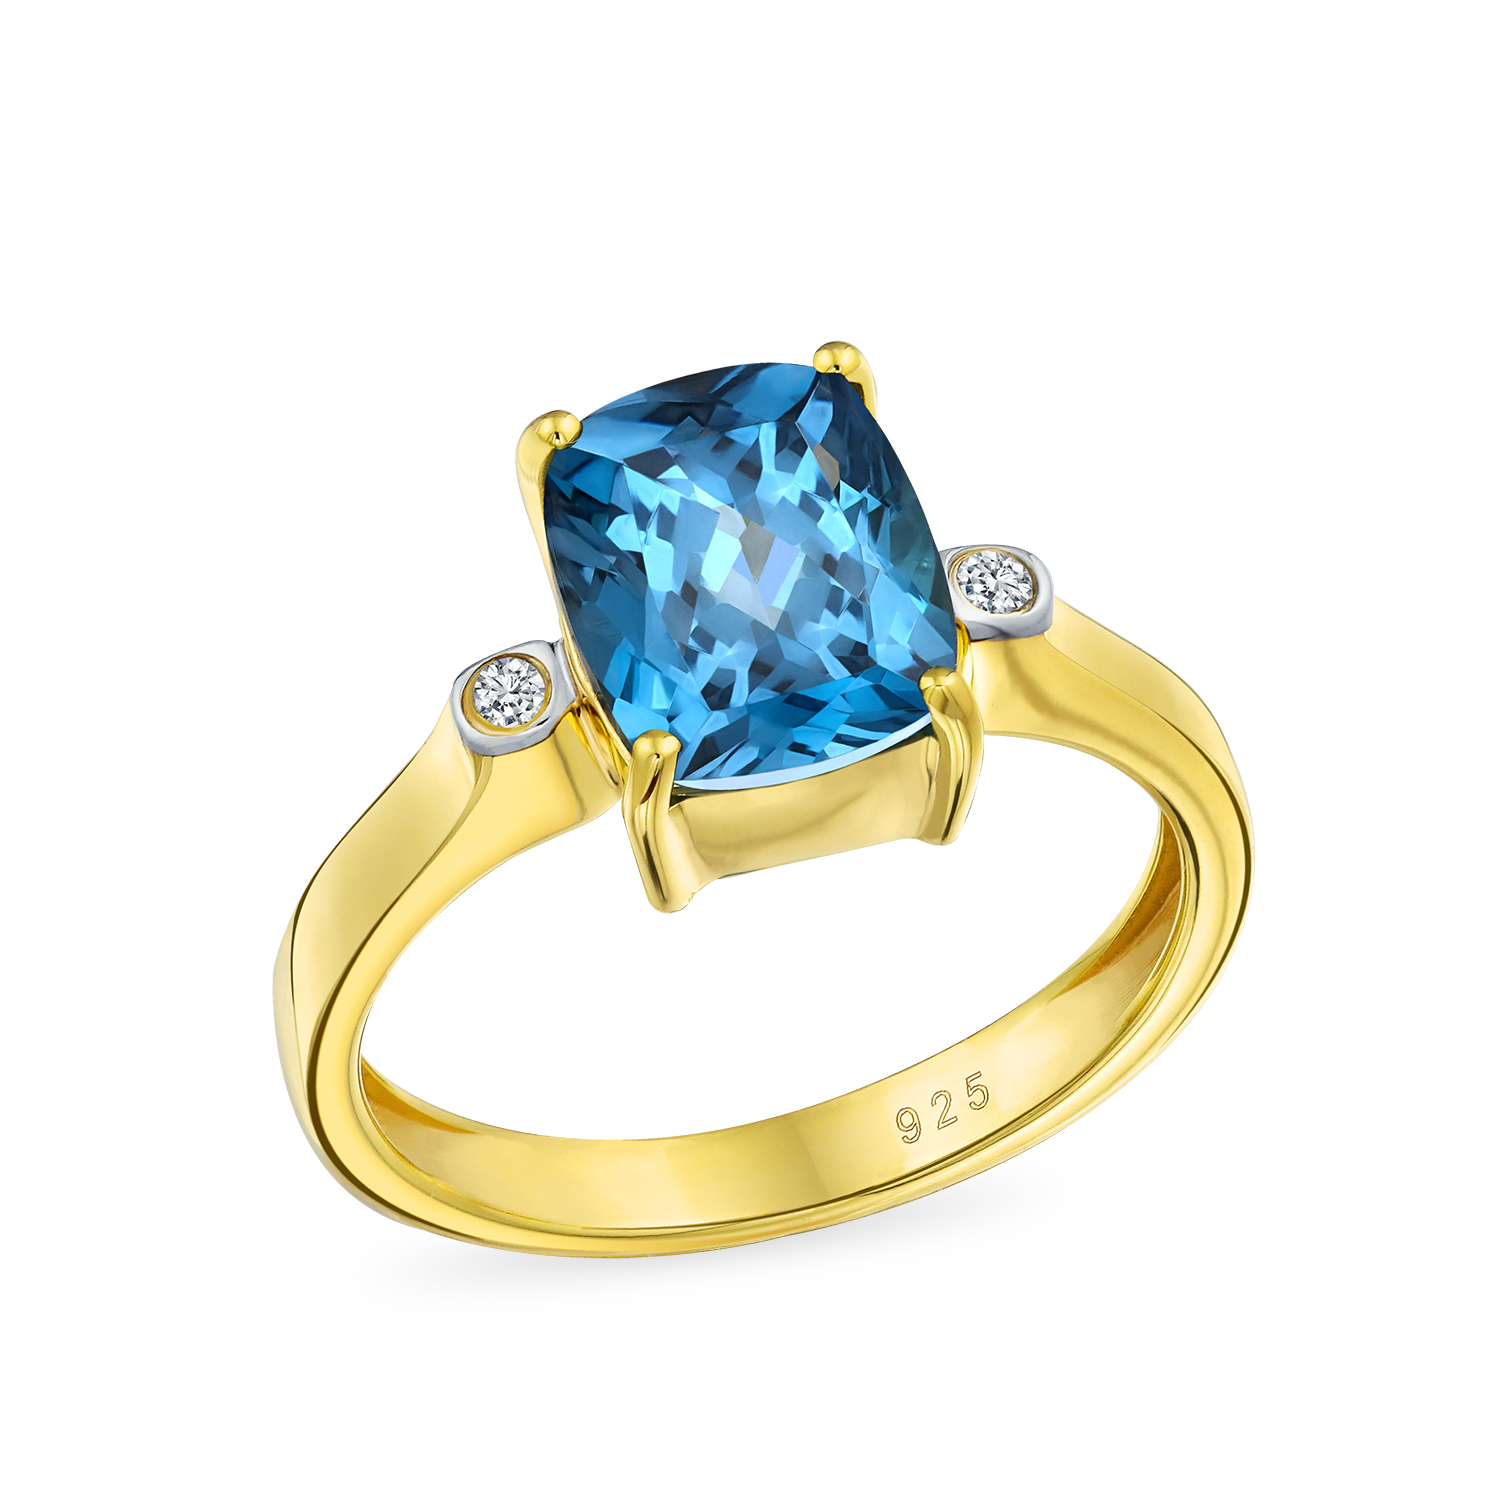 bling jewelry 3.2CT Solitaire London Blue Topaz Cocktail Ring 14K Plated .925 Silver